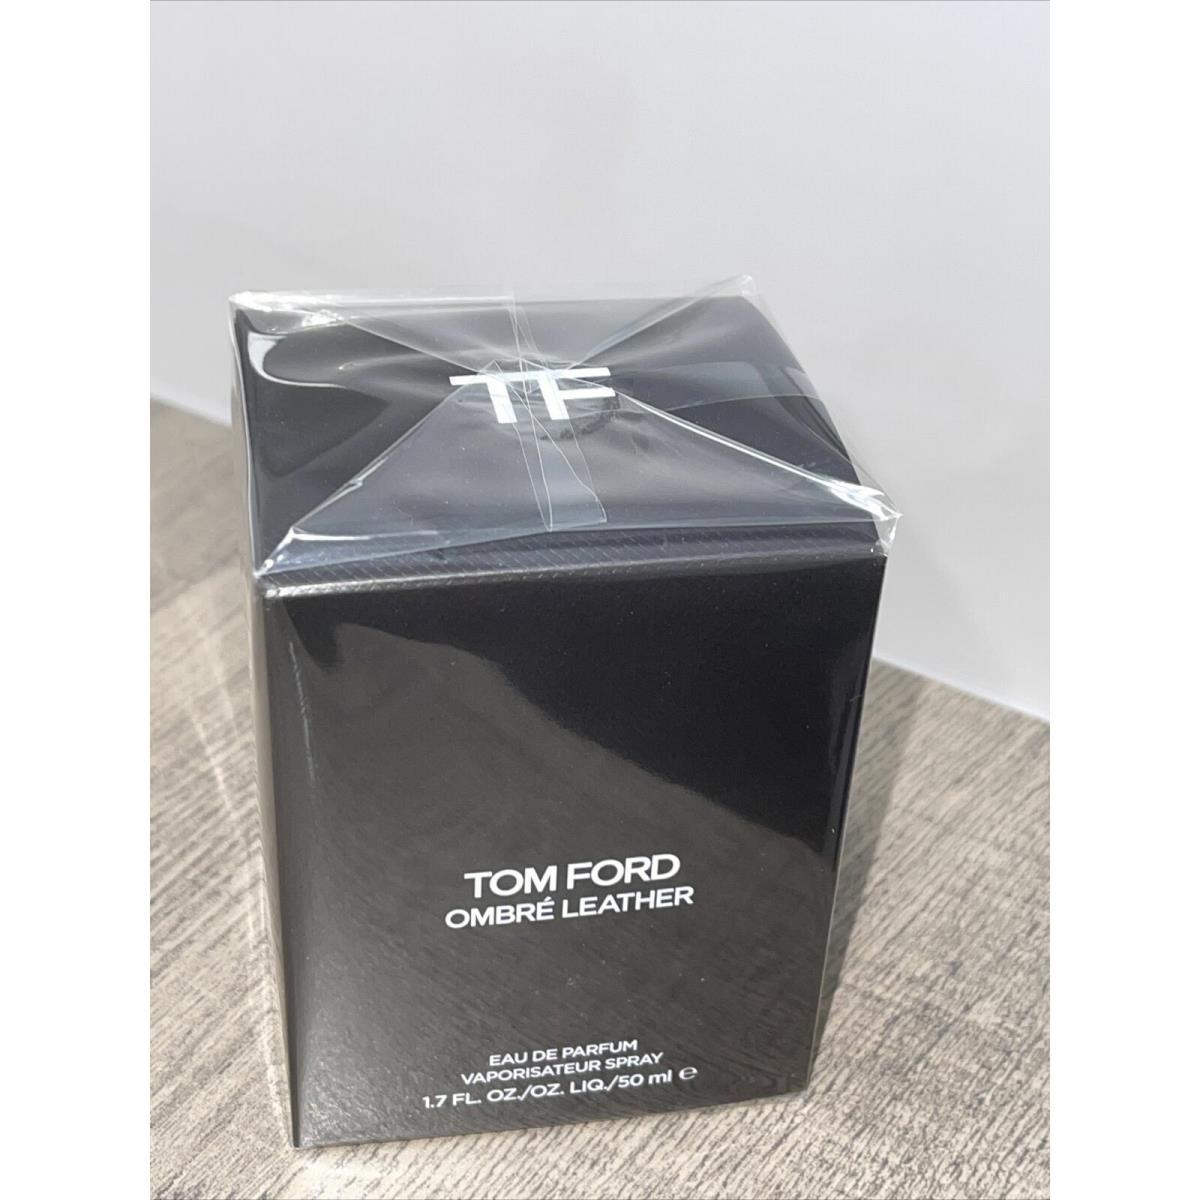 TOM FORD OMBRE LEATHER by Tom Ford 1.7 OZ EAU DE PARFUM SPRAY NEW in Box  for Men 888066075138